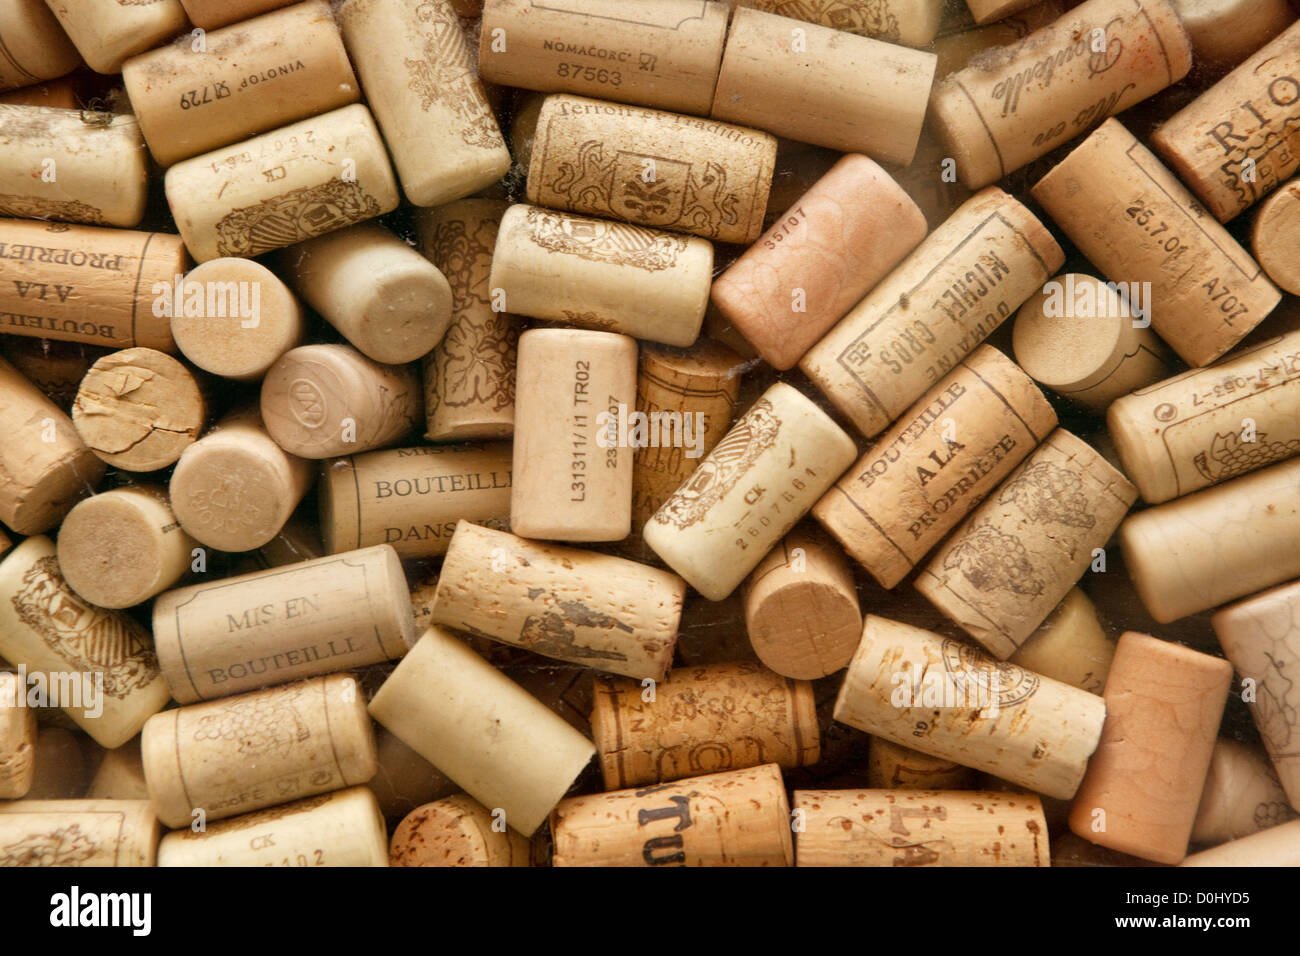 Wine corks on display in a shop window in Leadenhall Market. Stock Photo